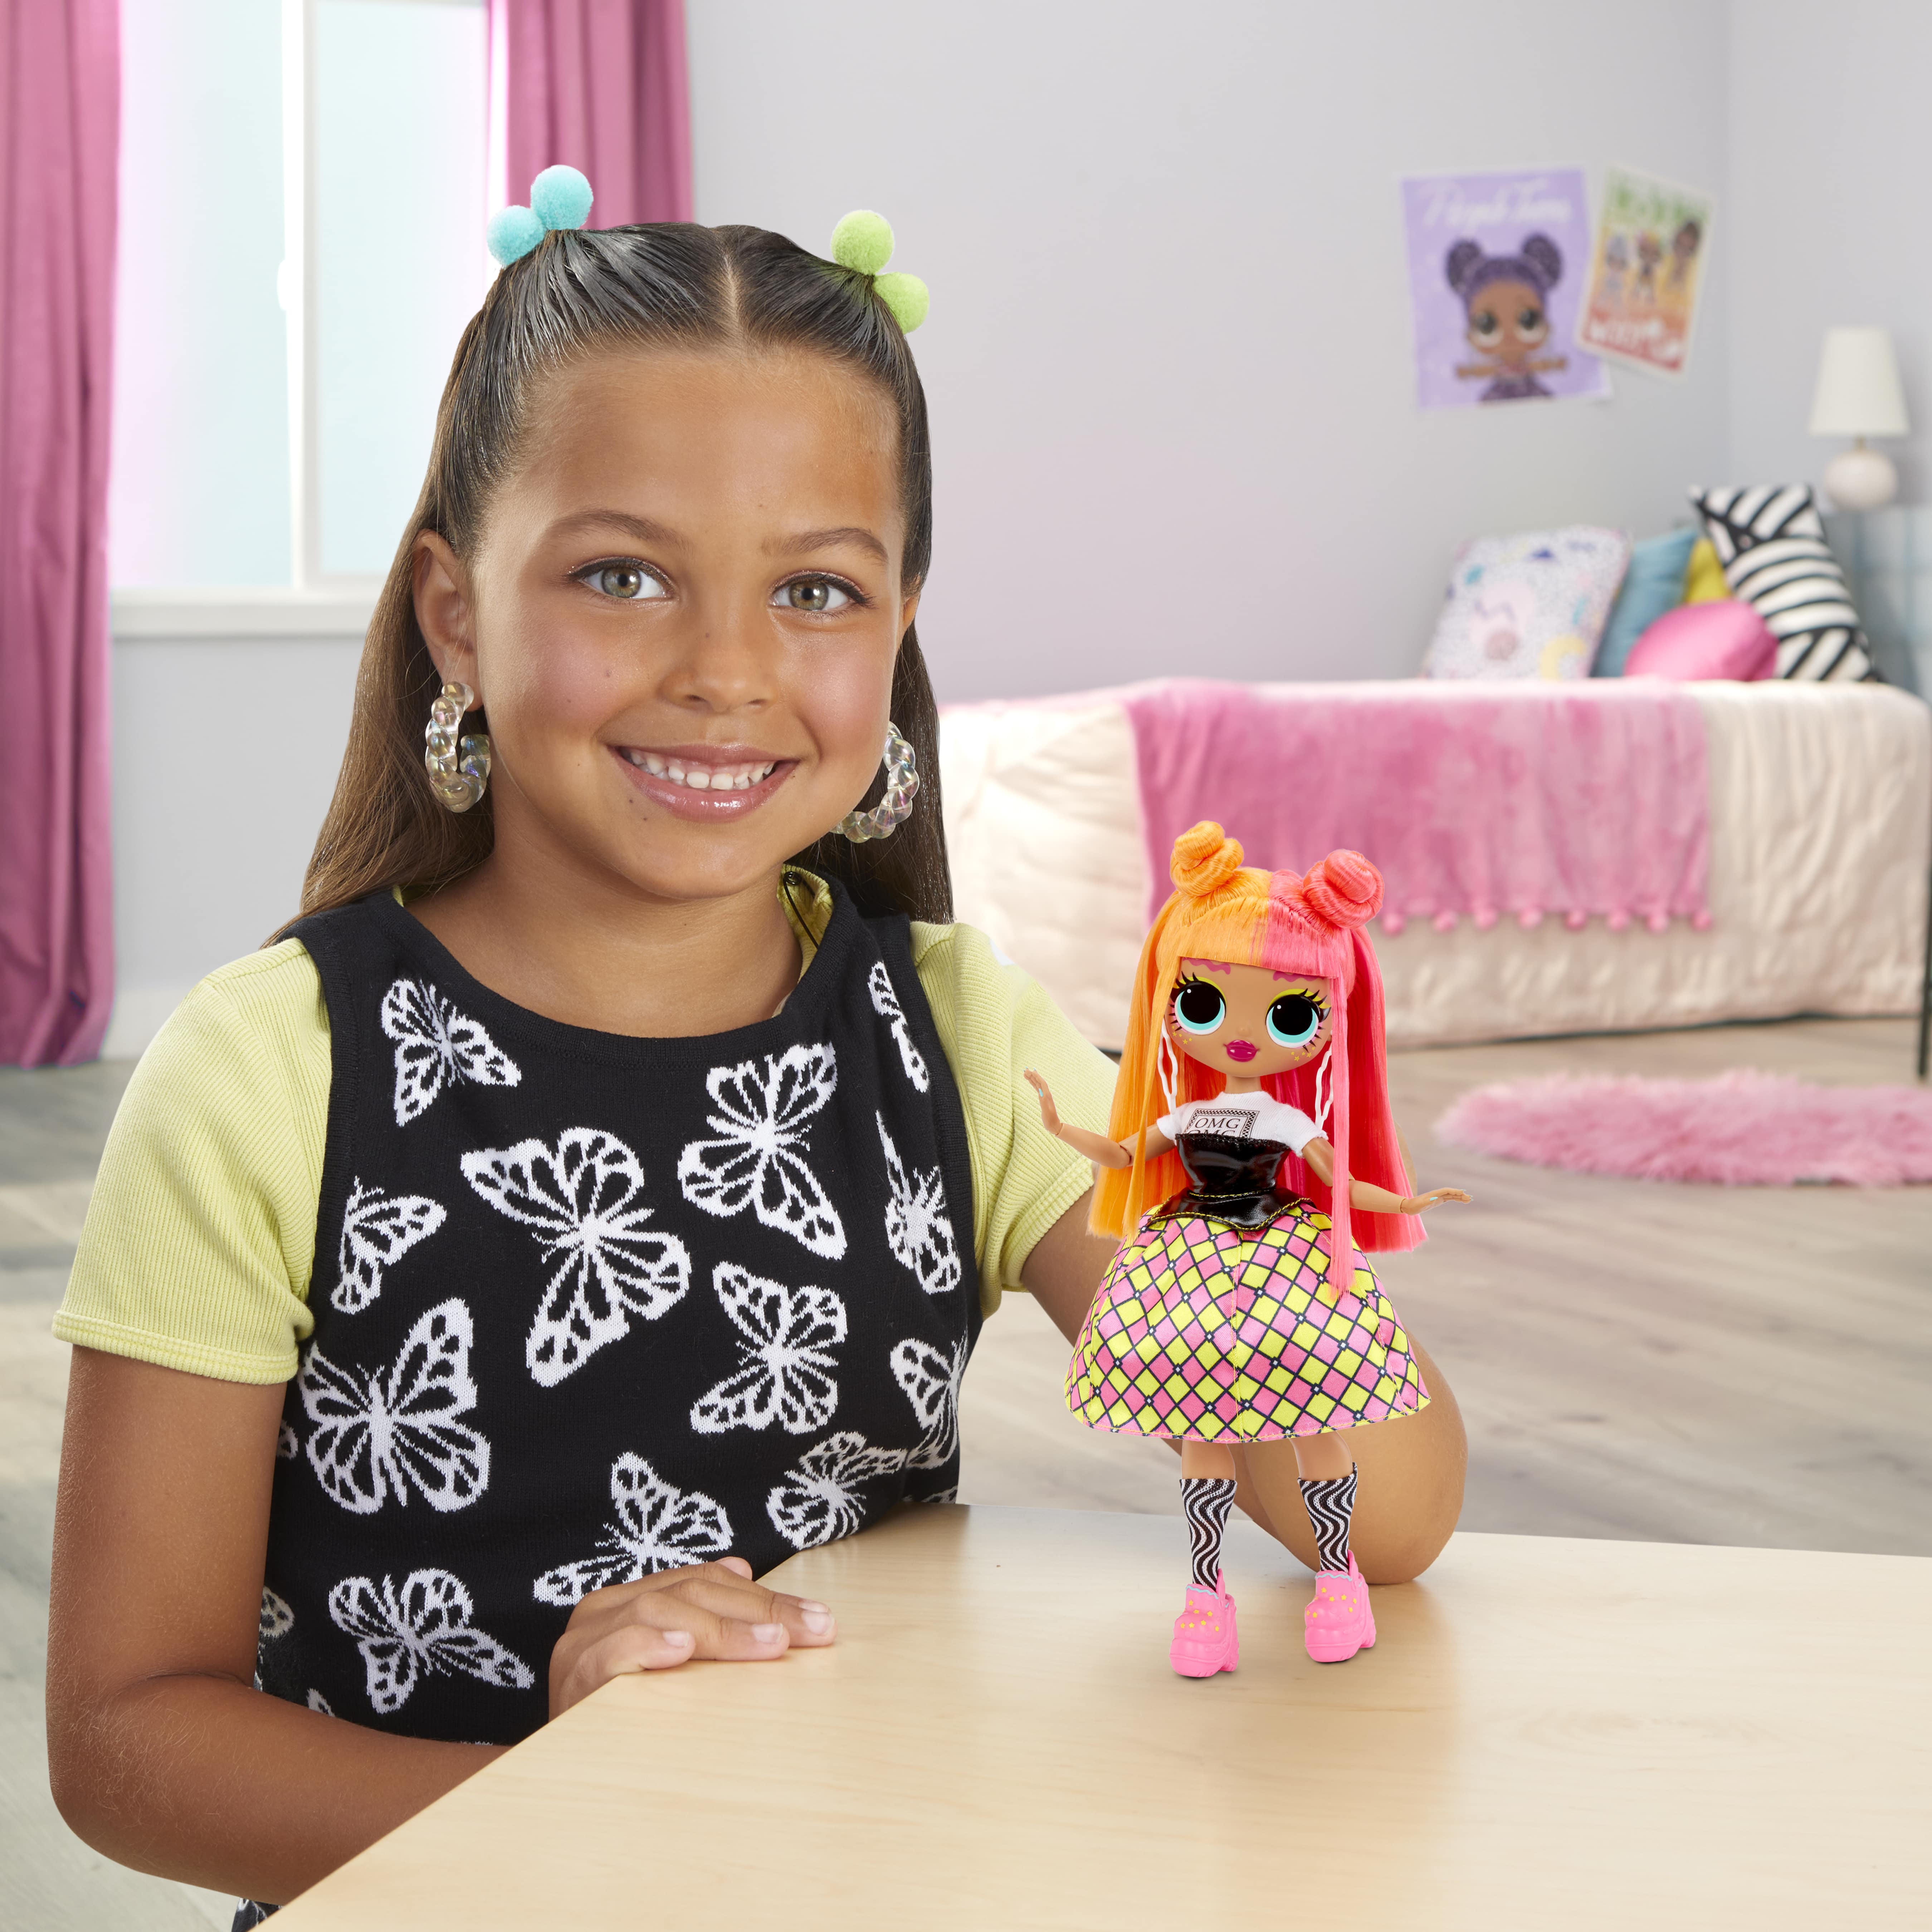 LOL Surprise OMG Neonlicious Fashion Doll with Multiple Surprises Including Transforming Fashions and Fabulous Accessories, Kids Gift Ages 4+ - image 5 of 8